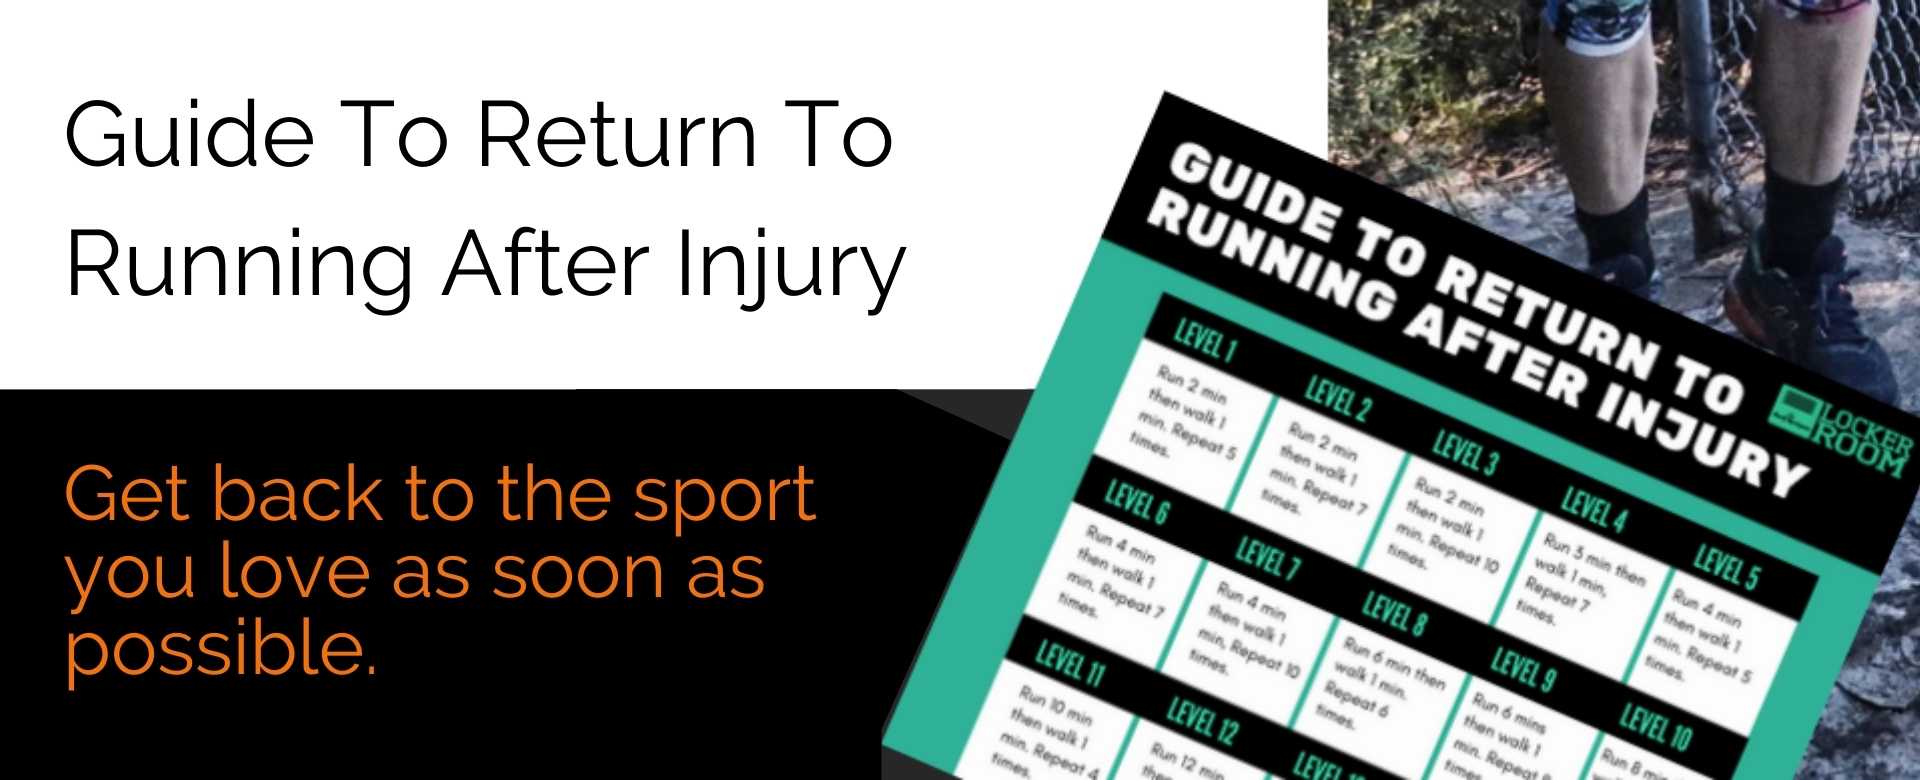 Guide to return to running after injury